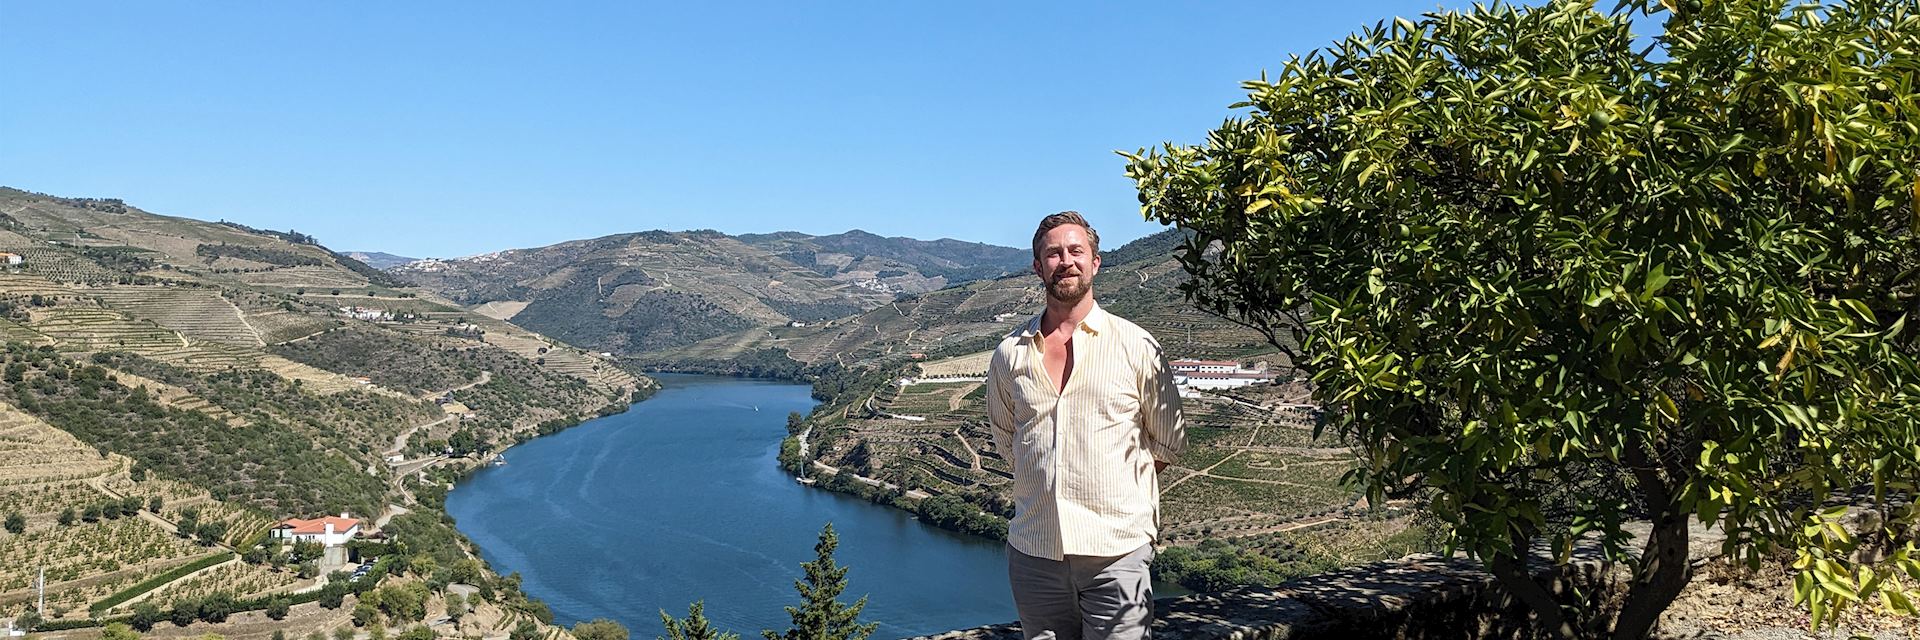 Eric at the Douro Valley, Portugal